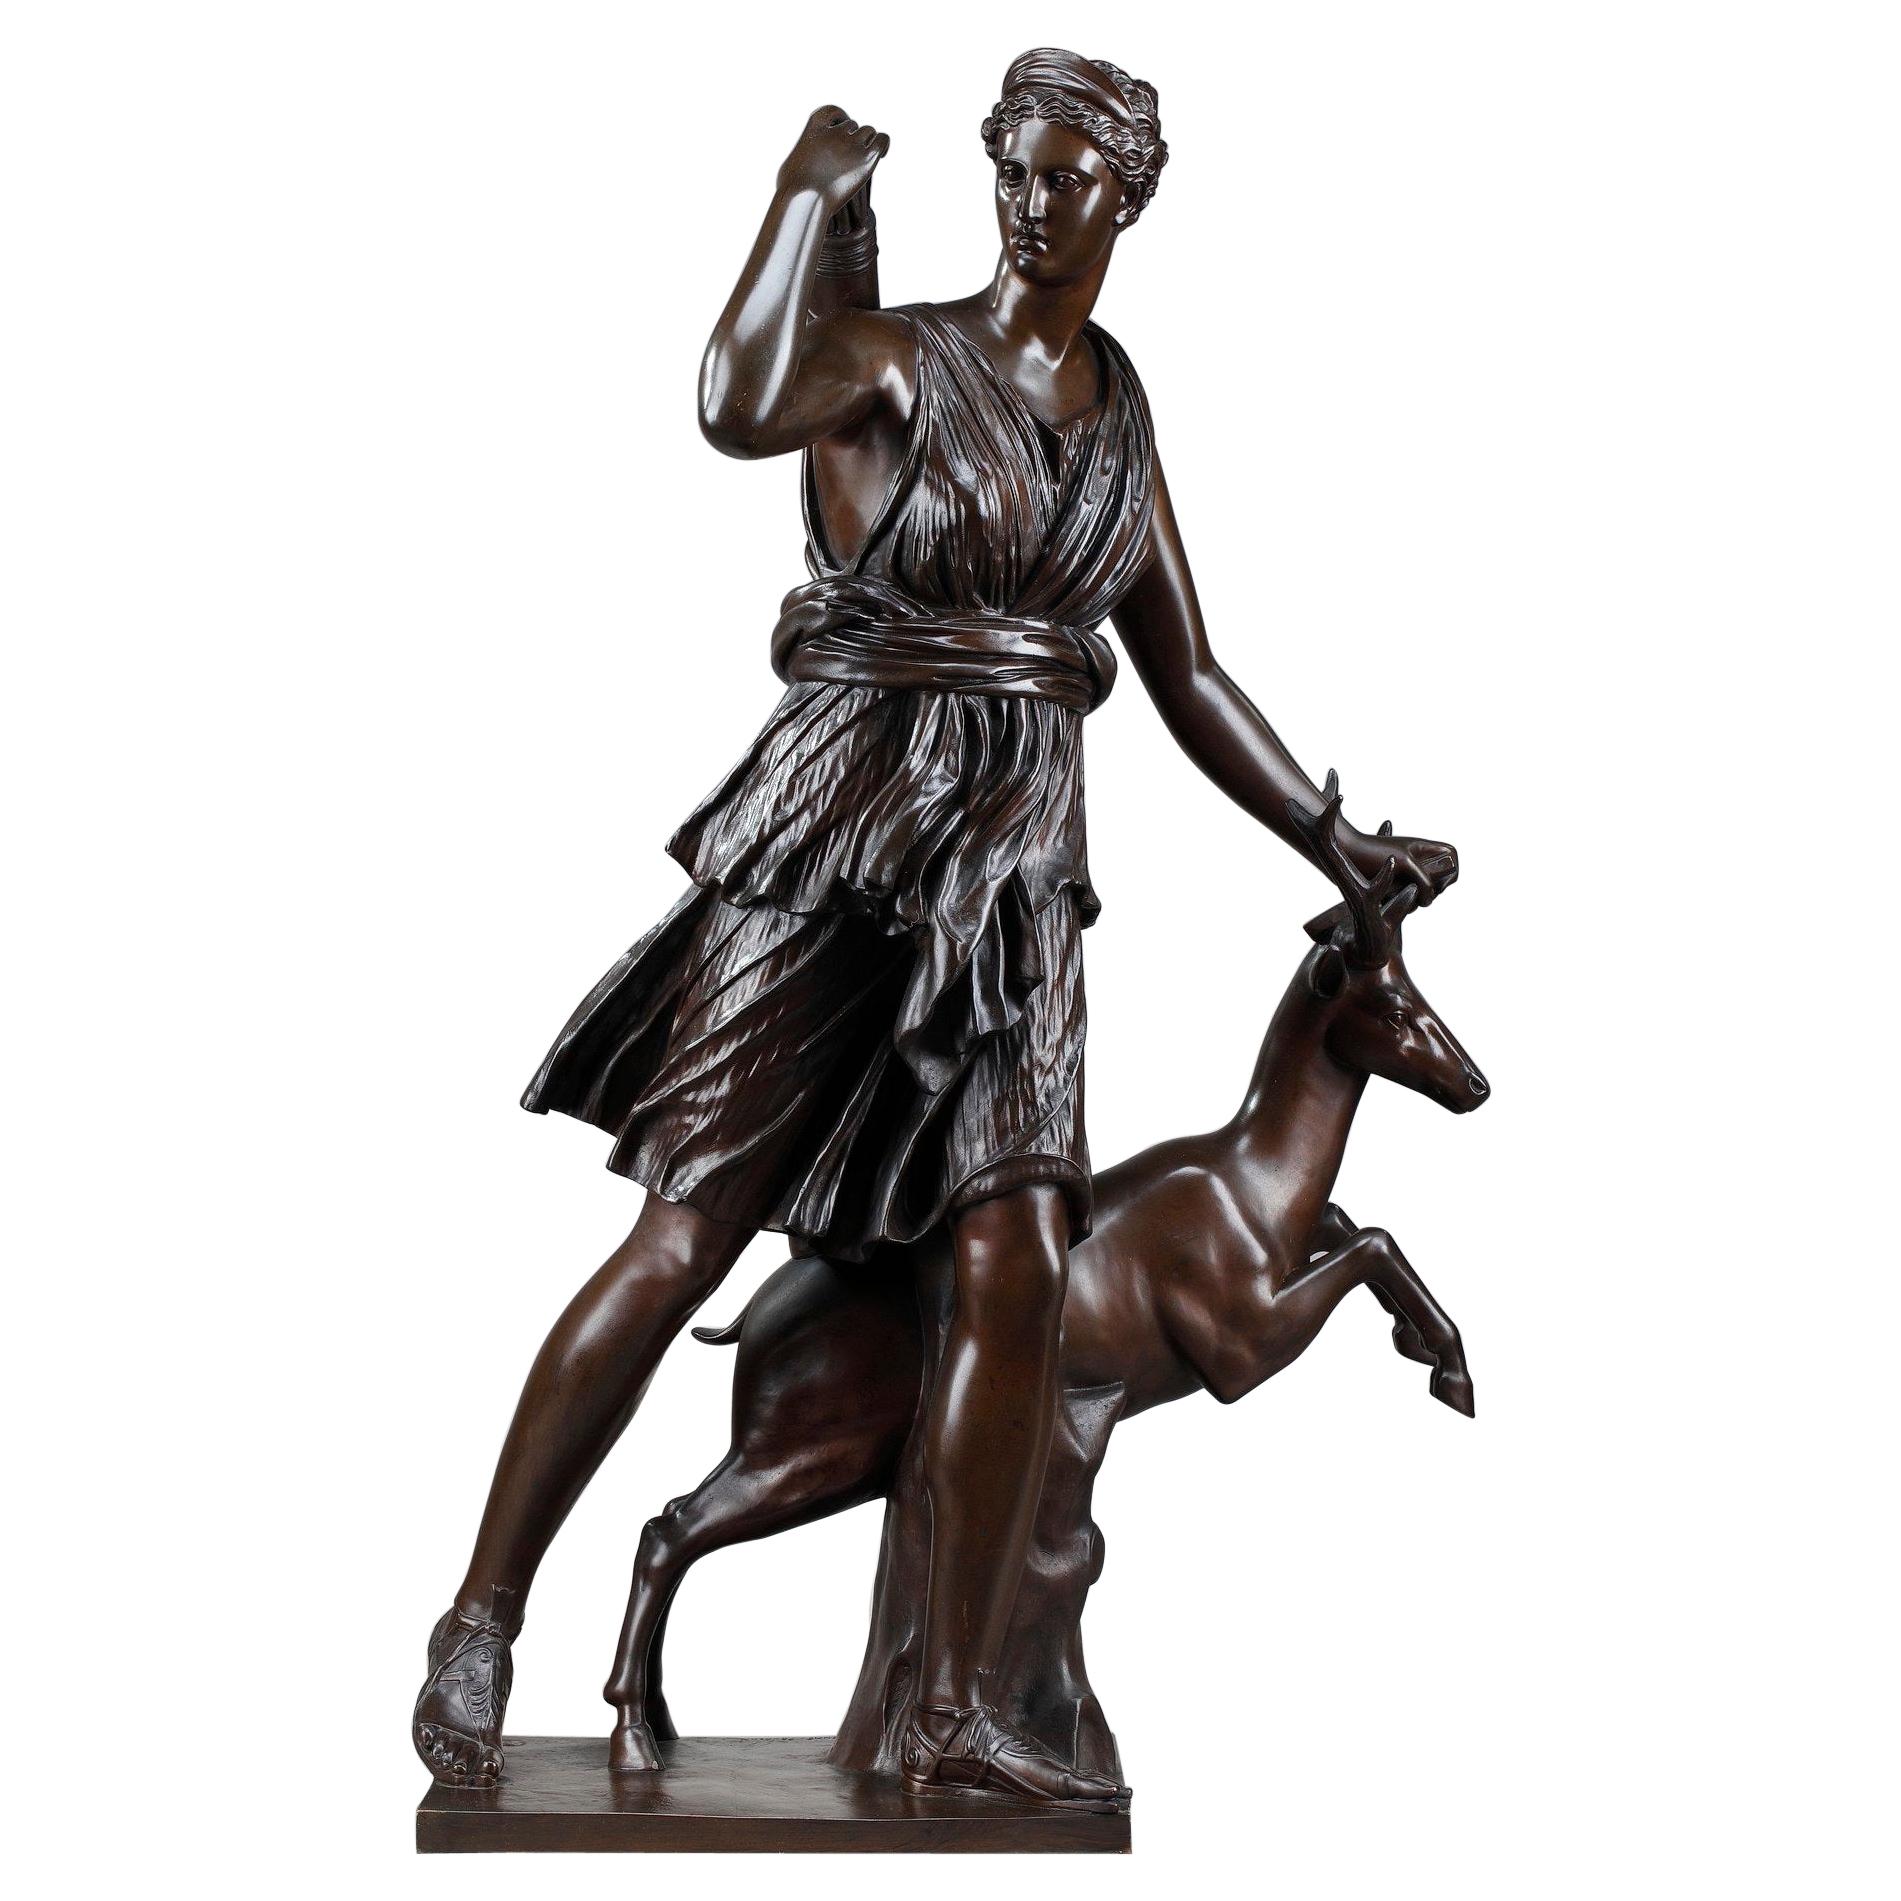 Bronze Sculpture, "Diana the Huntress", Foundry Barbedienne